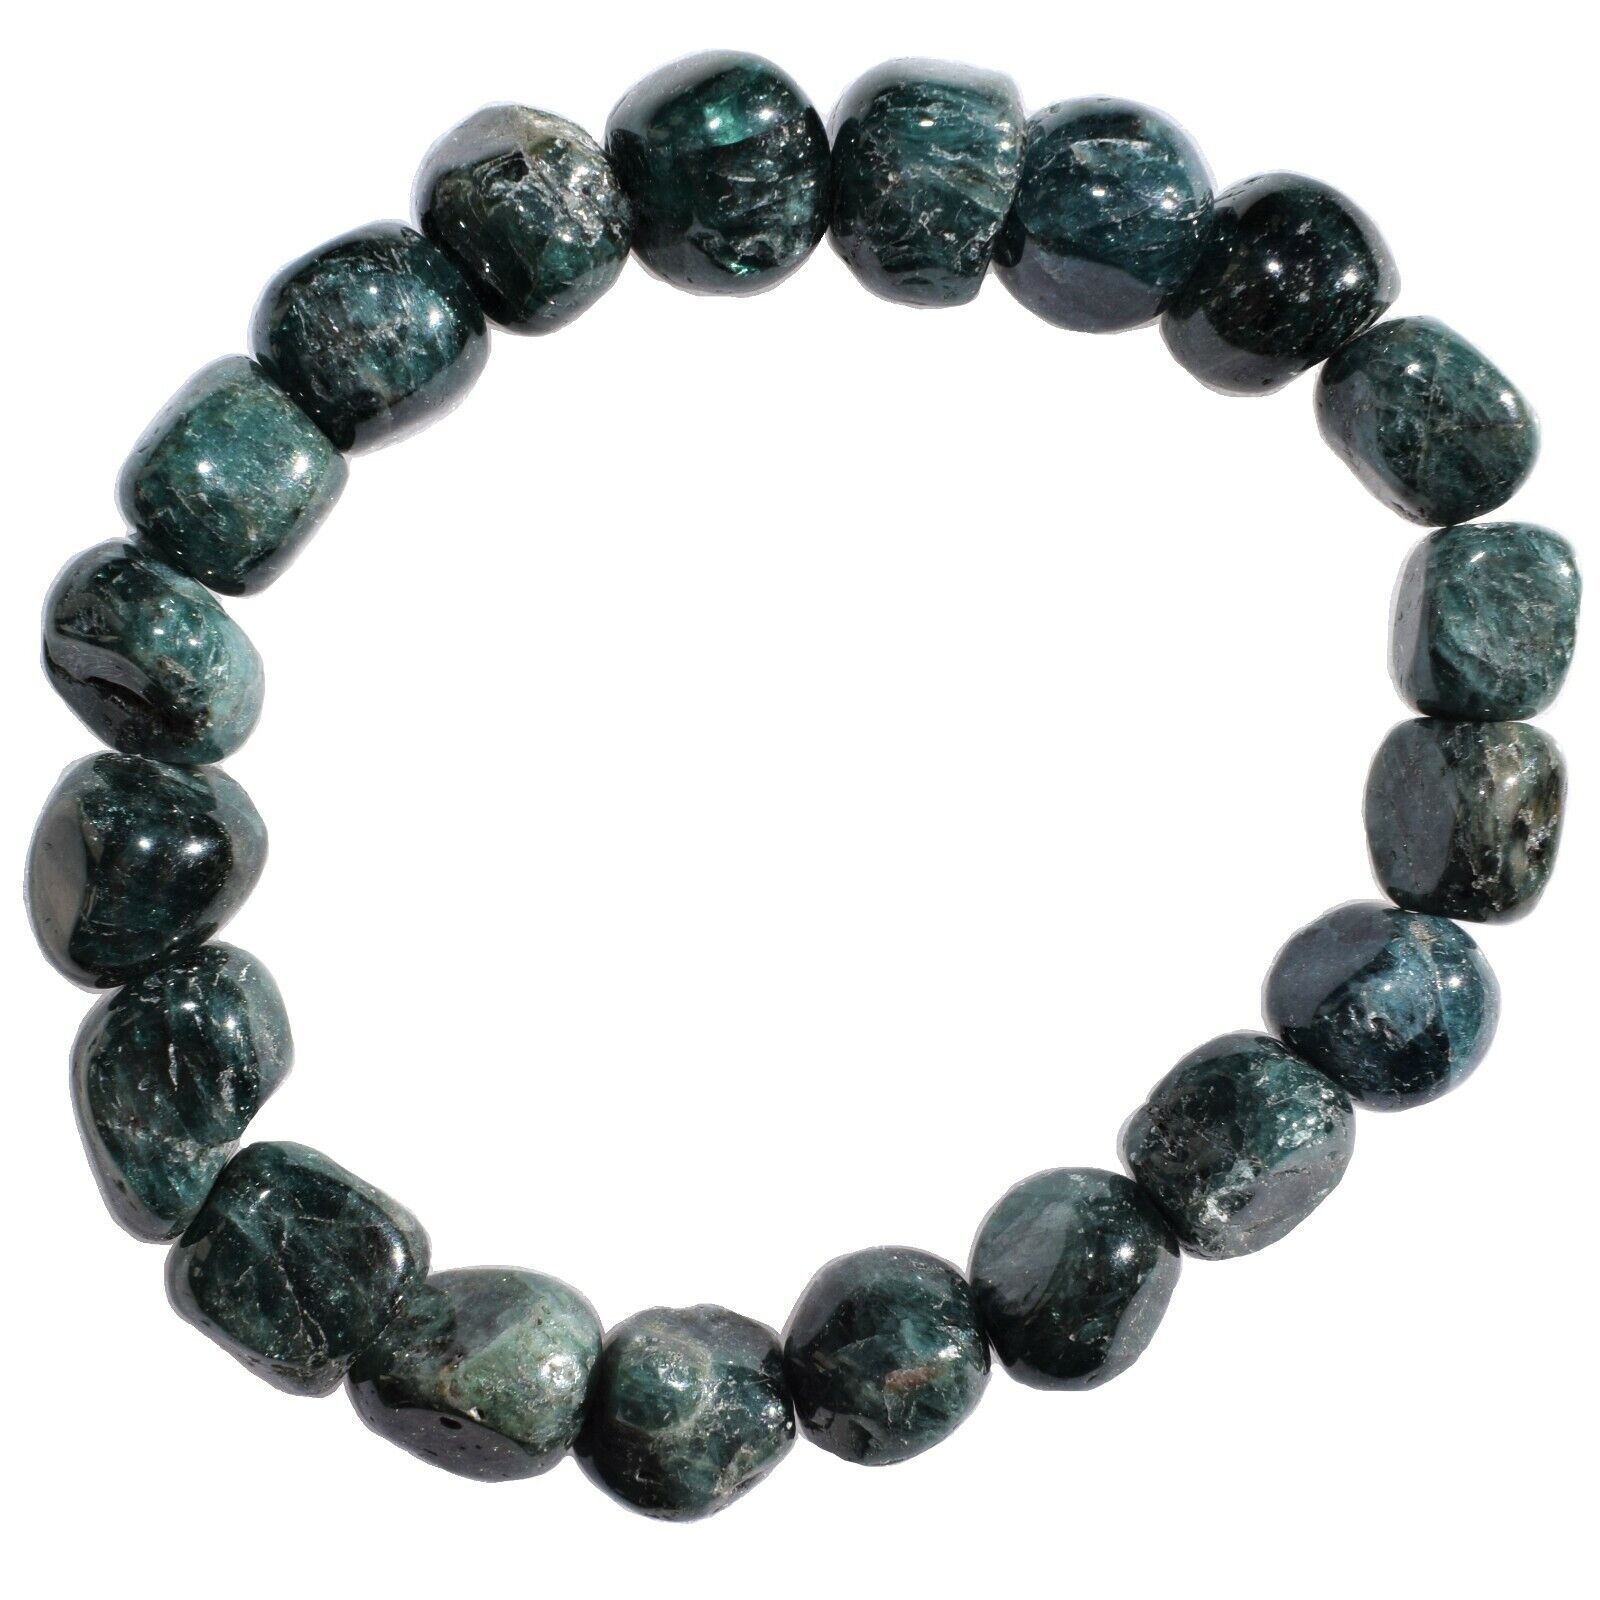 Premium CHARGED Natural Blue Green Apatite Crystal Nugget Stretchy Bracelet